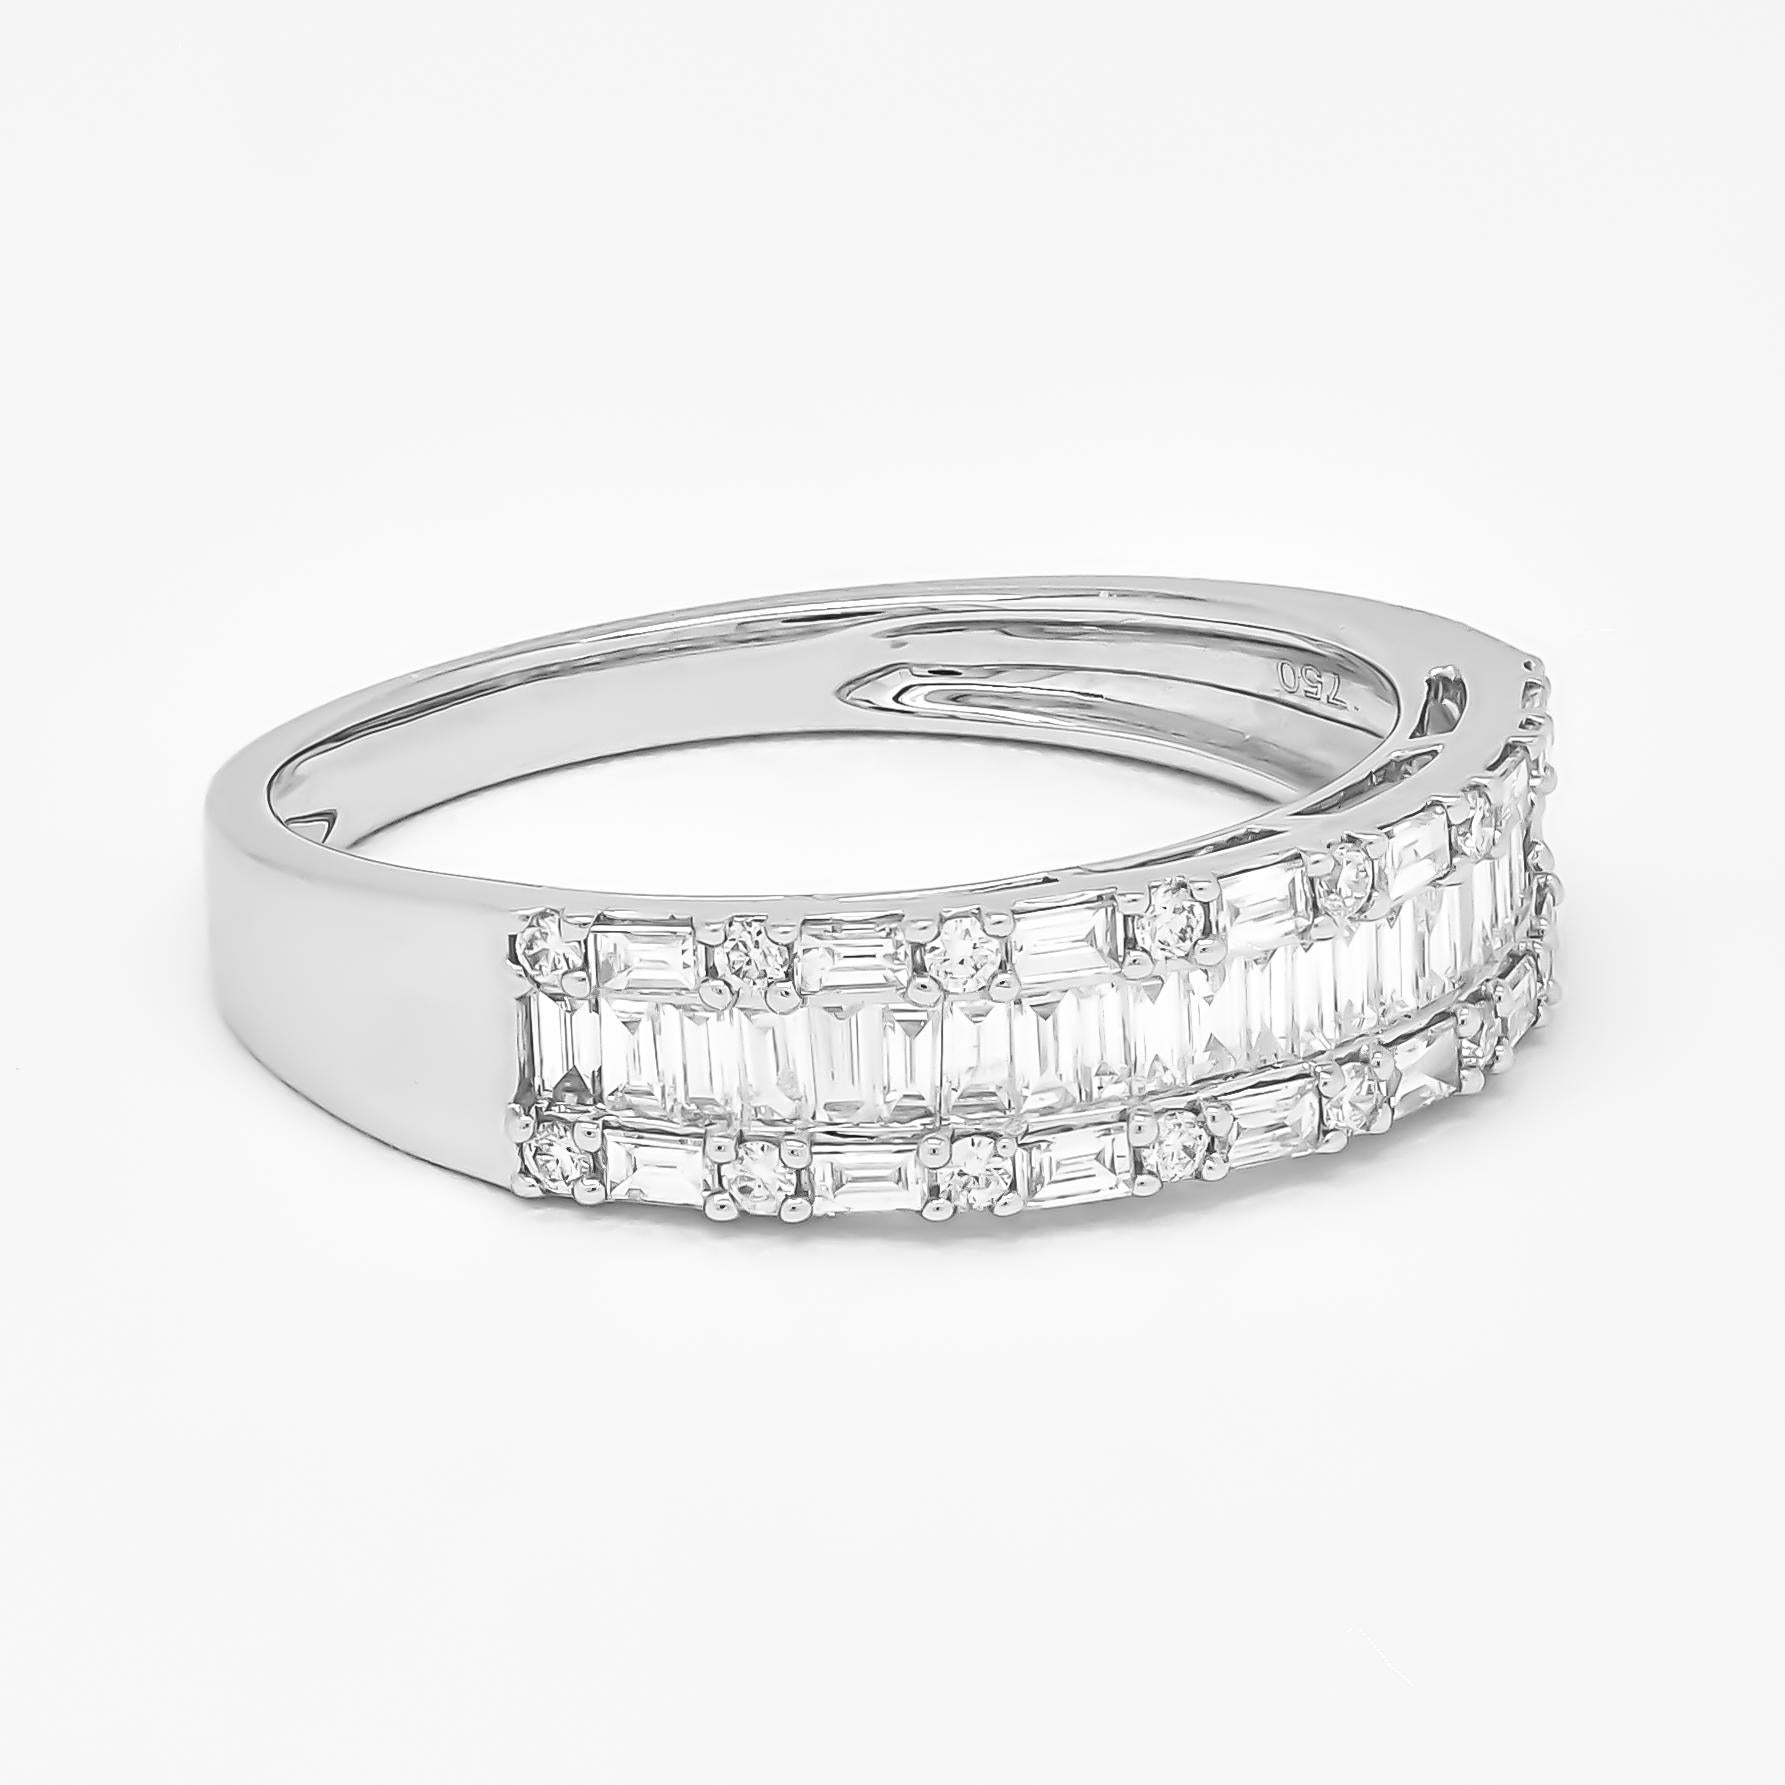 Celebrate your love with a gift that shines as brightly as your connection. The 18K Gold Natural Diamond Accents Round Brilliant and Baguette Cut Channel Set Half Anniversary Band Ring is a symbol of your bond, expertly crafted to stand the test of